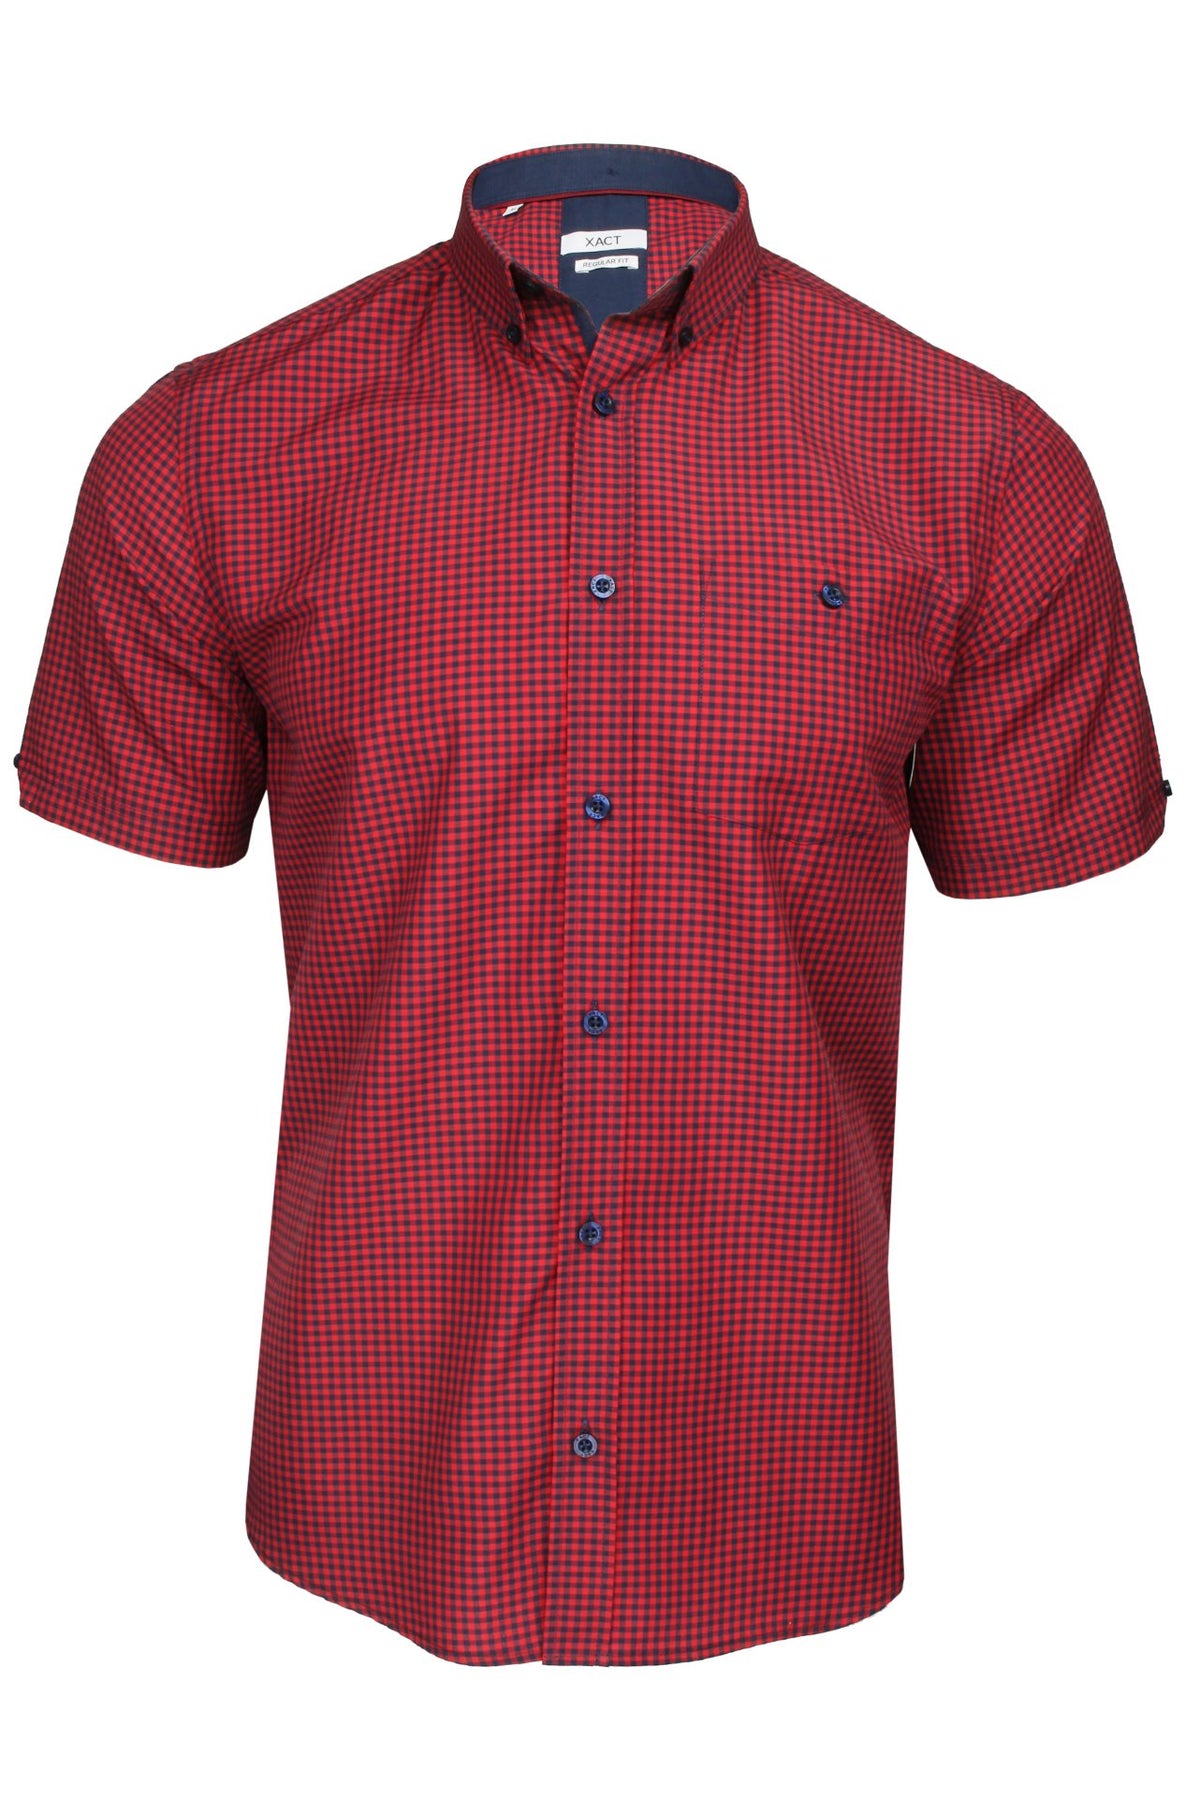 #group_chilli-red/-navy